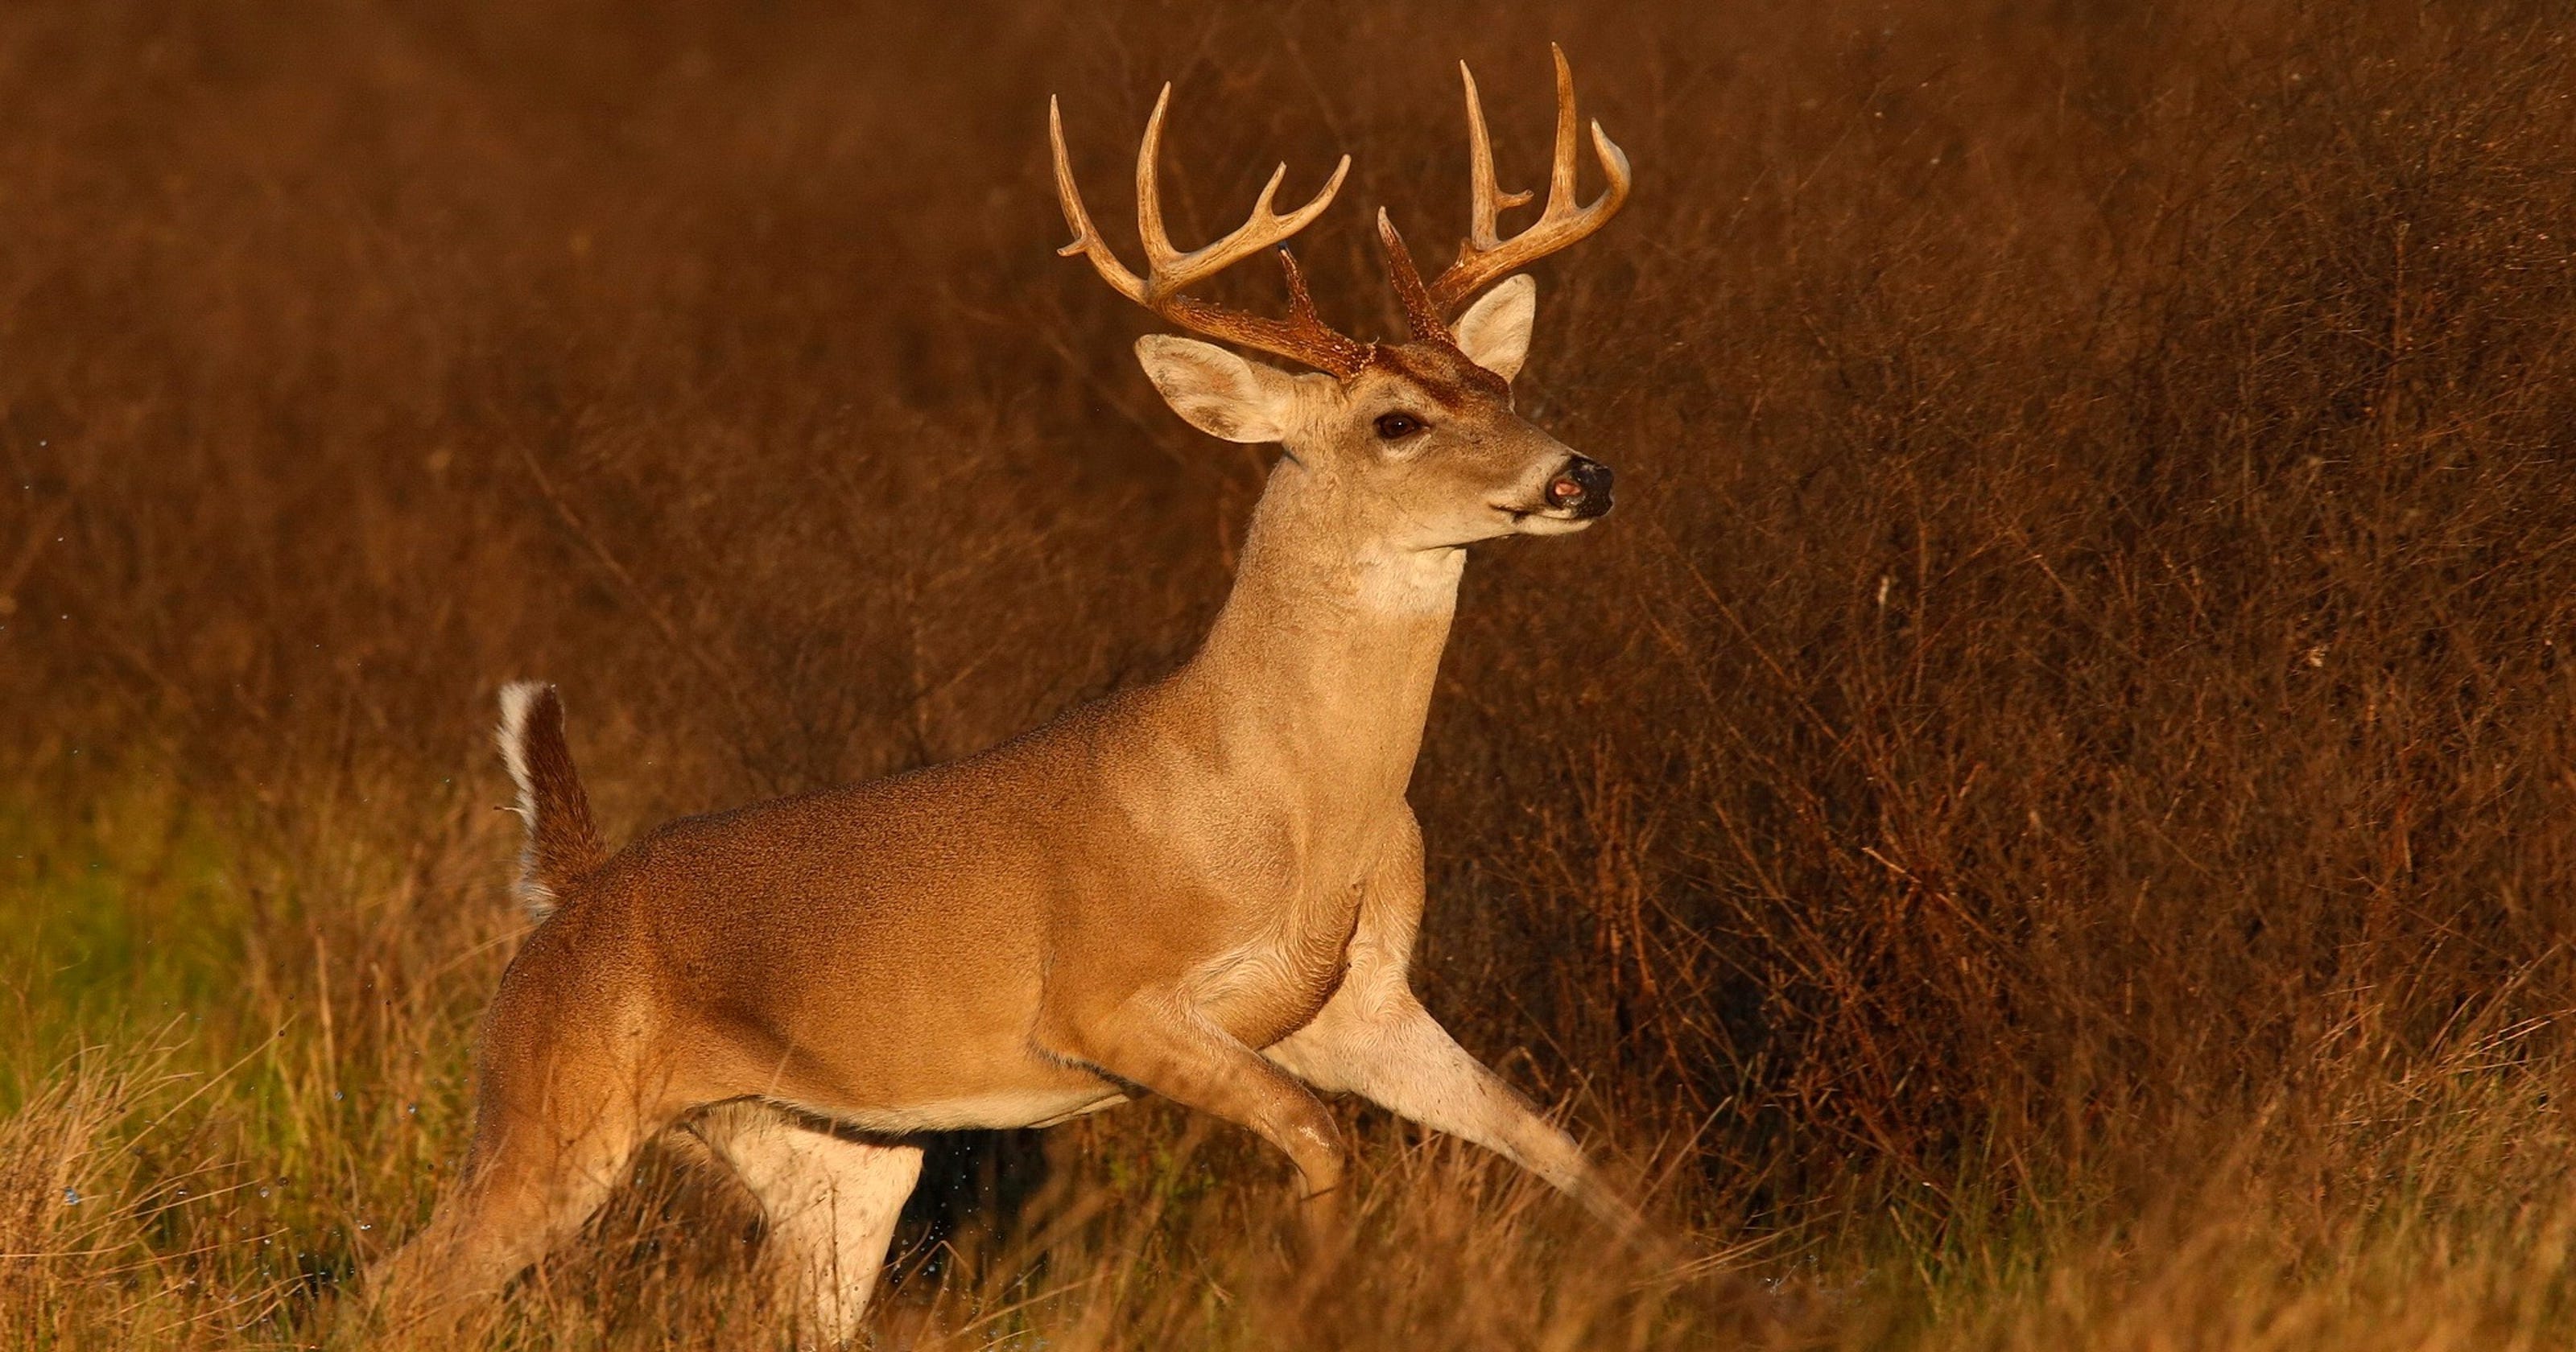 Texas' deer population is estimated at 4 million whitetails.